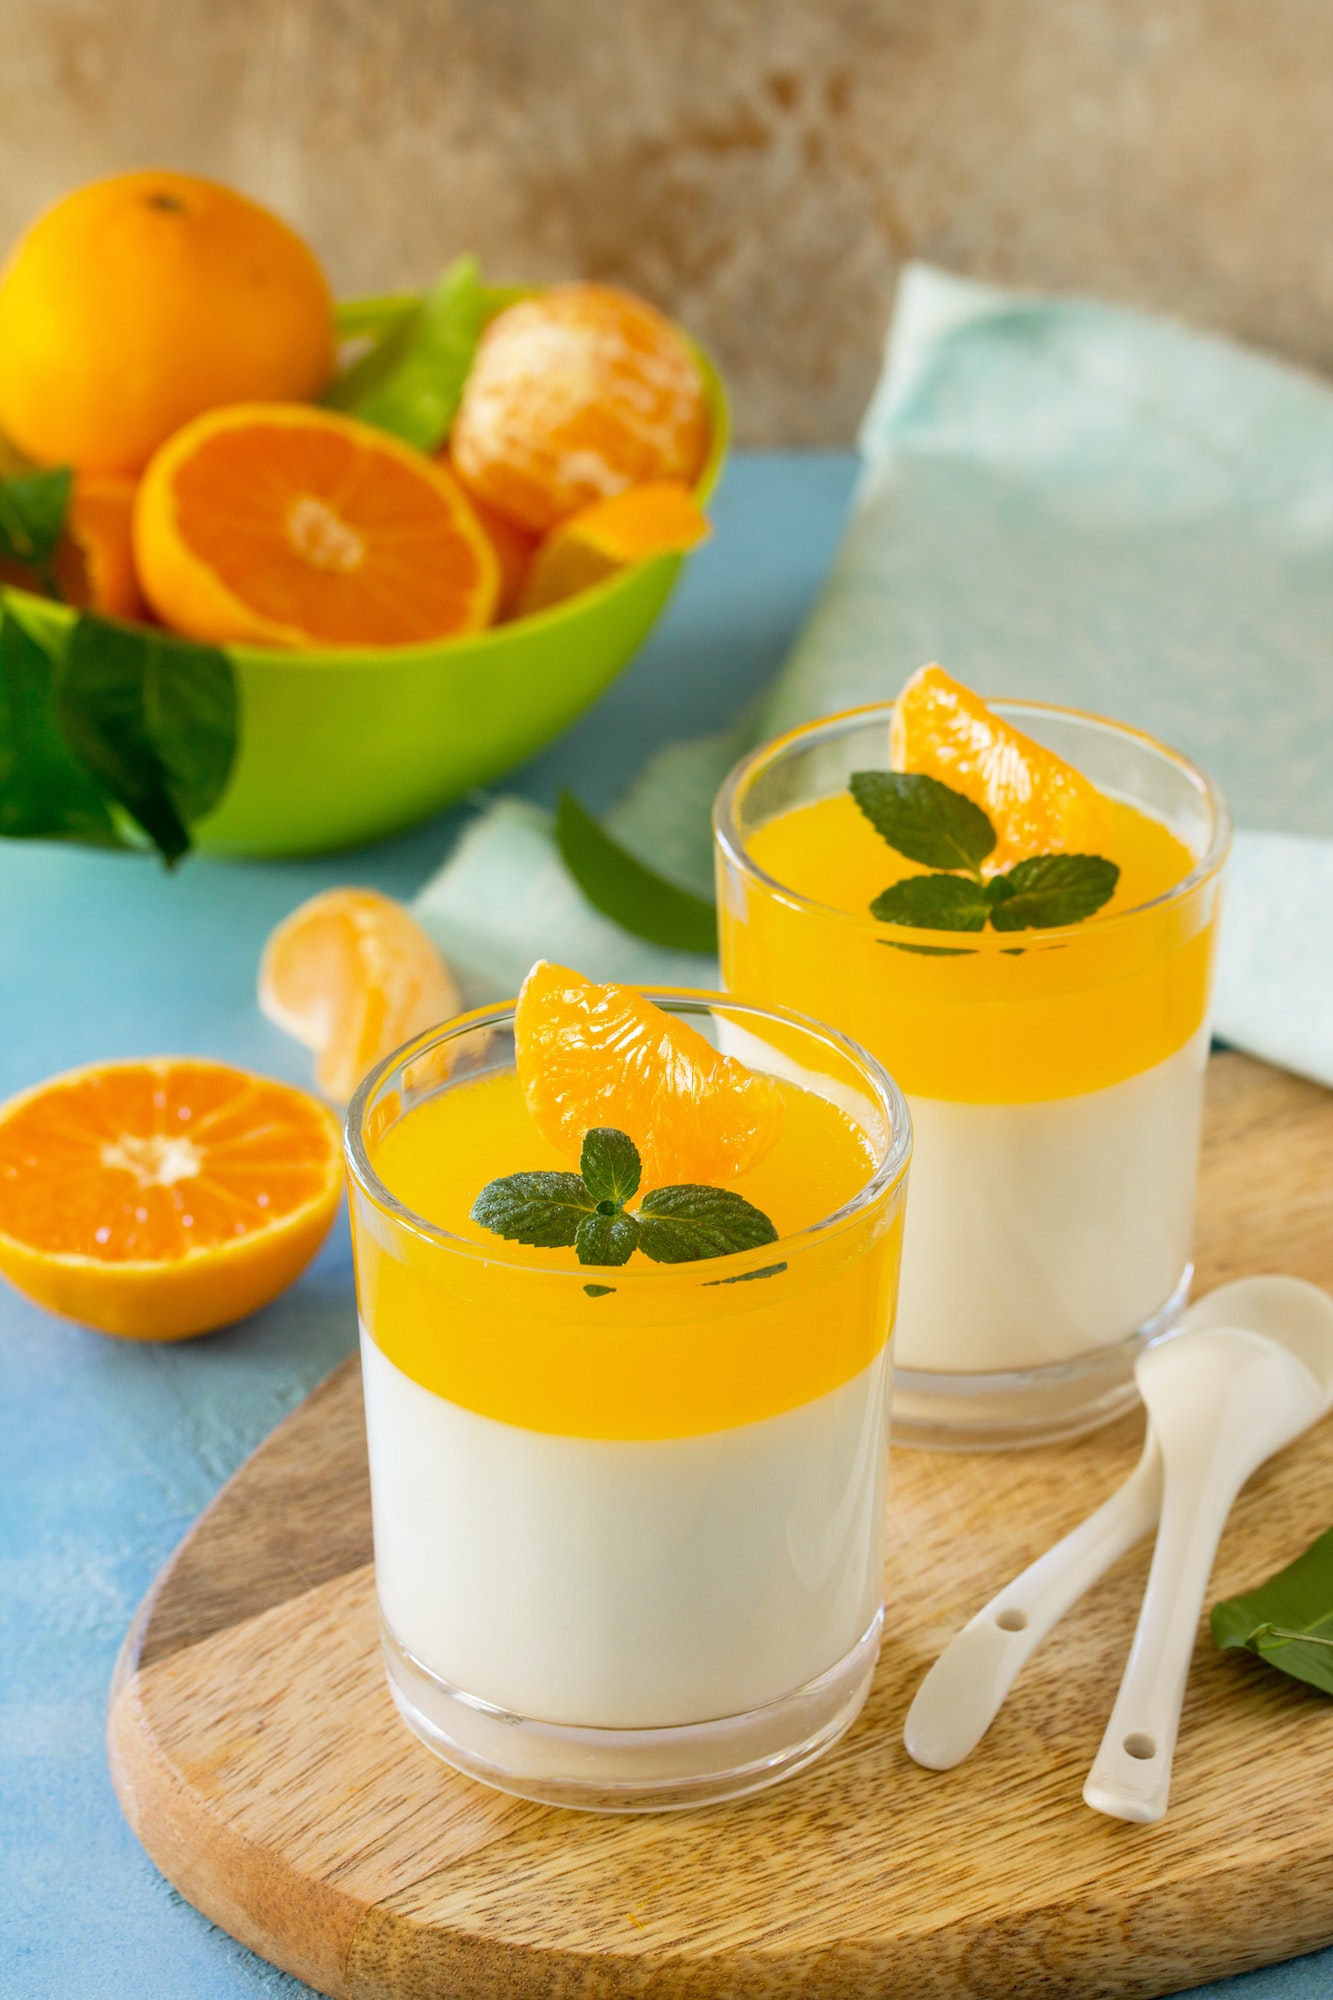 Panna cotta with tangerines jelly and mint, Italian dessert, homemade cuisine.